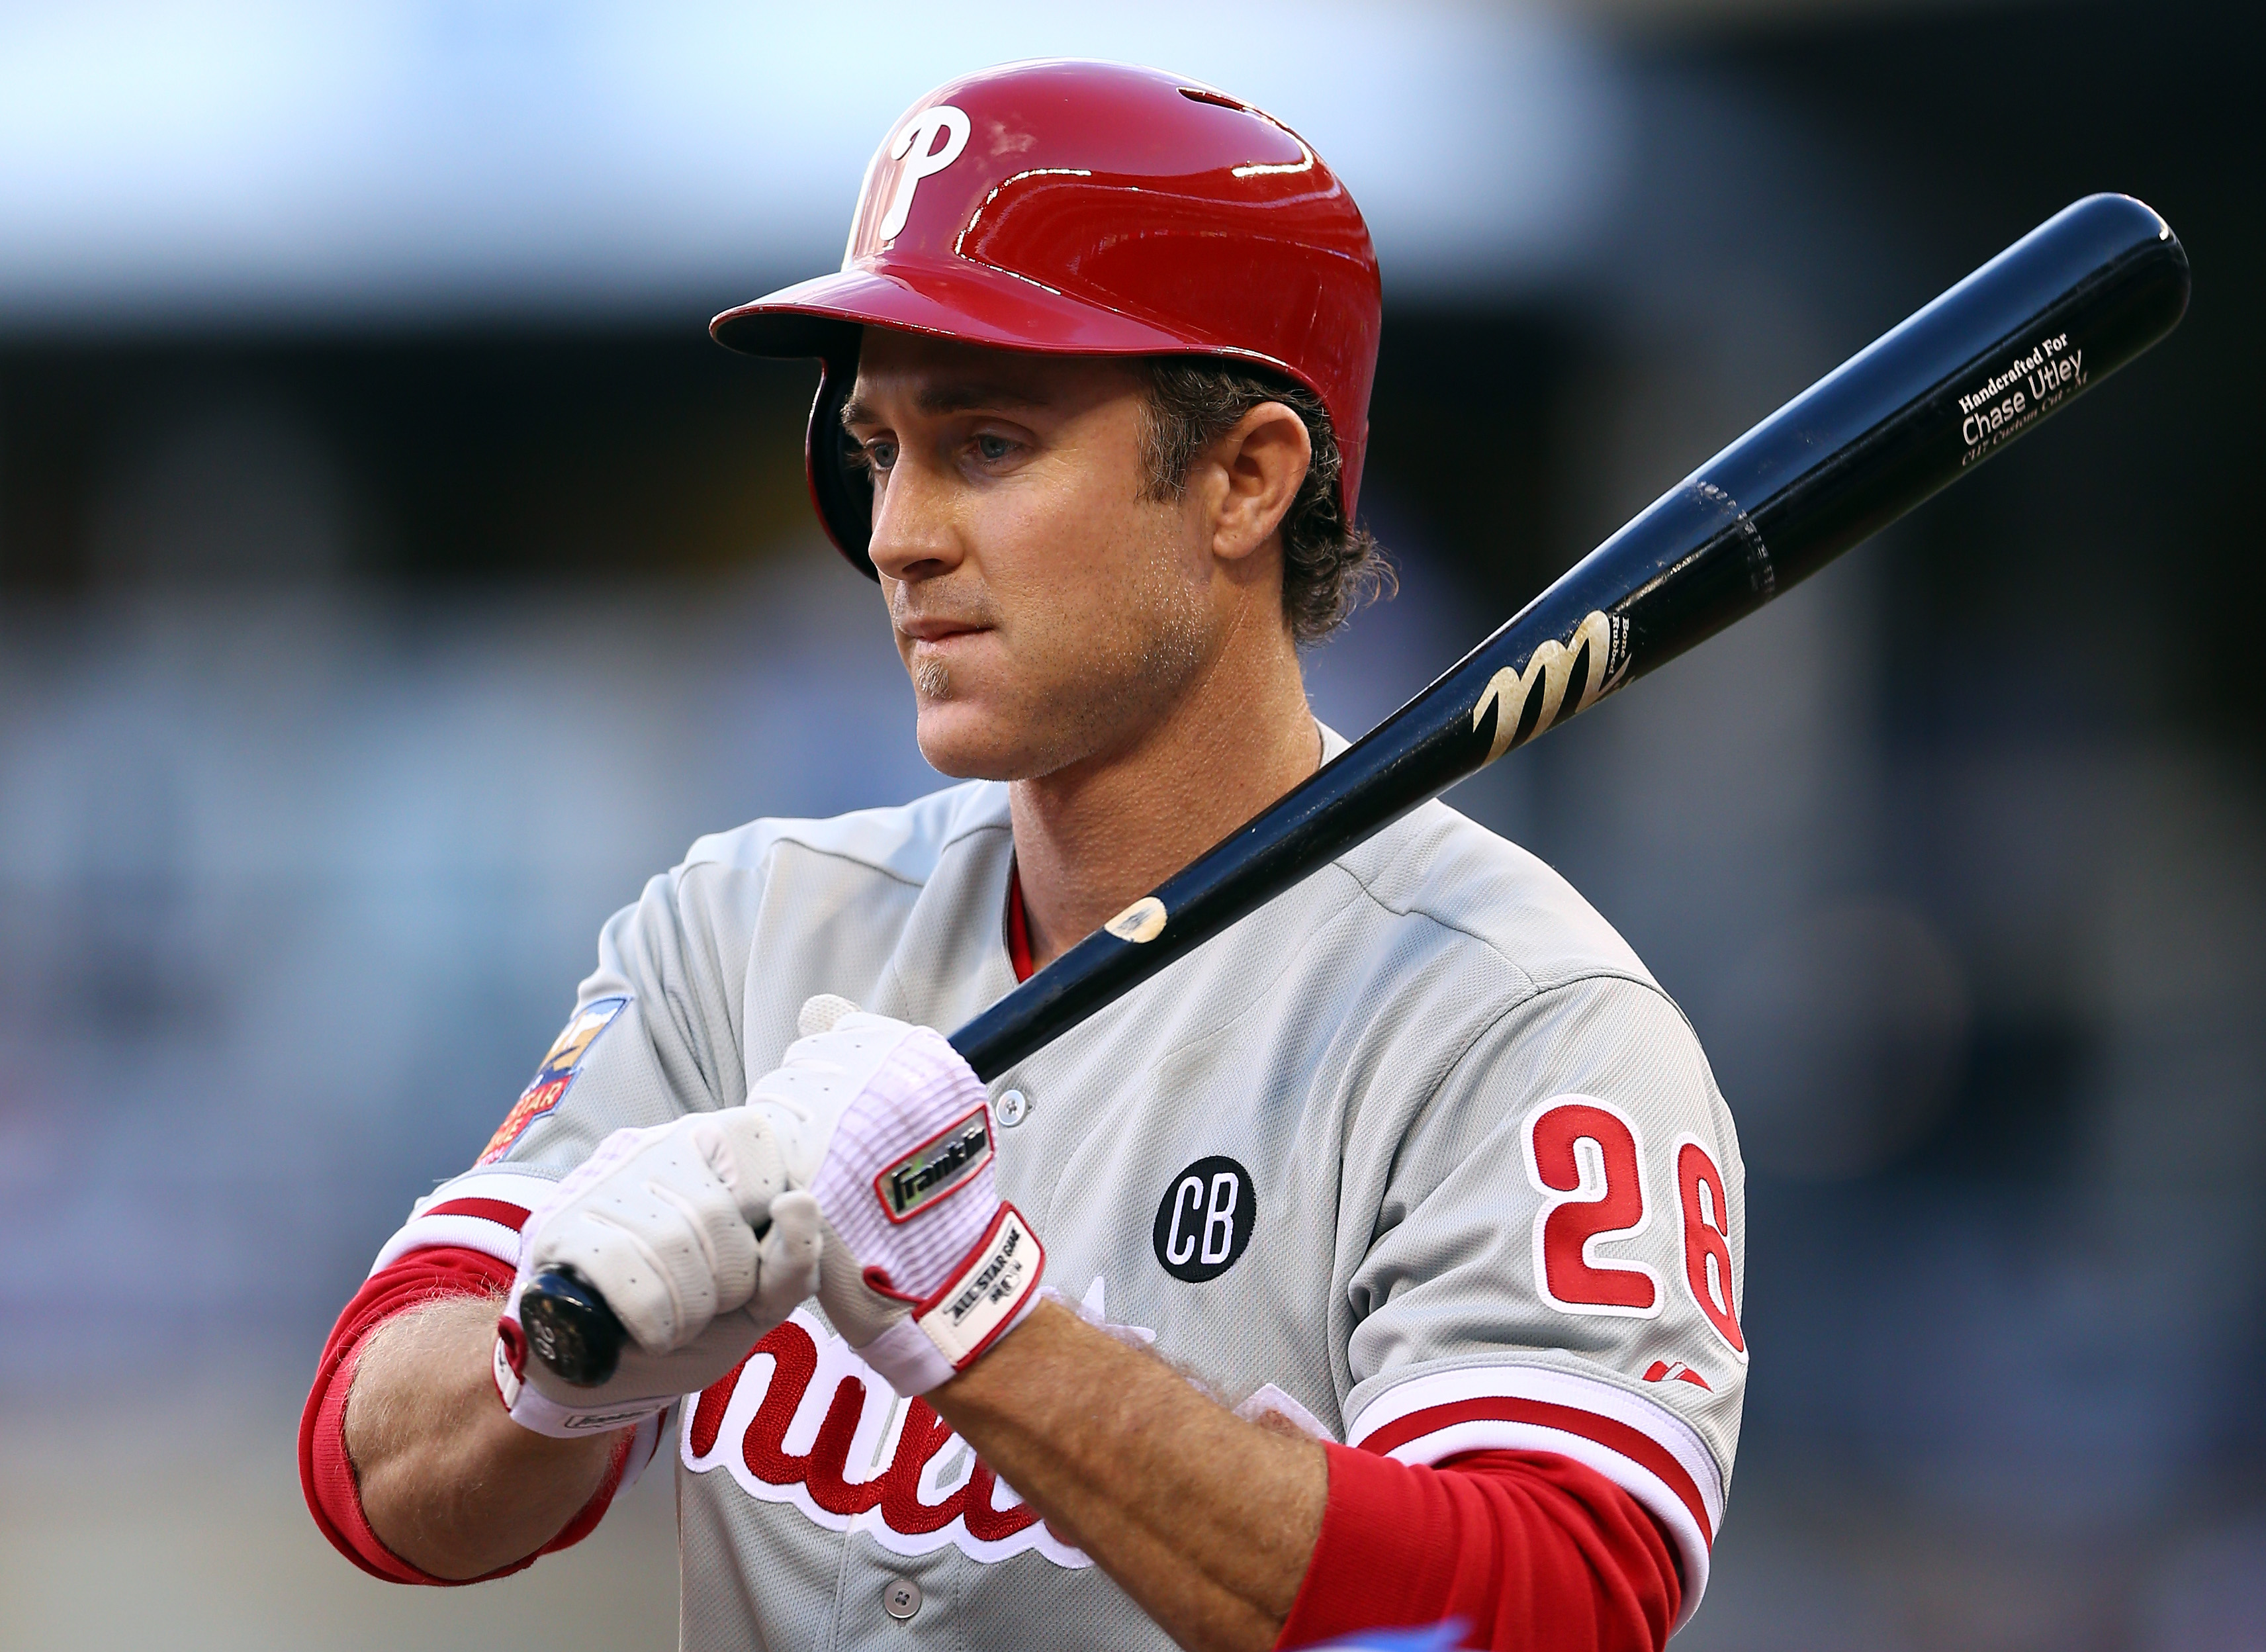 Chase Utley has first six-hit game of career